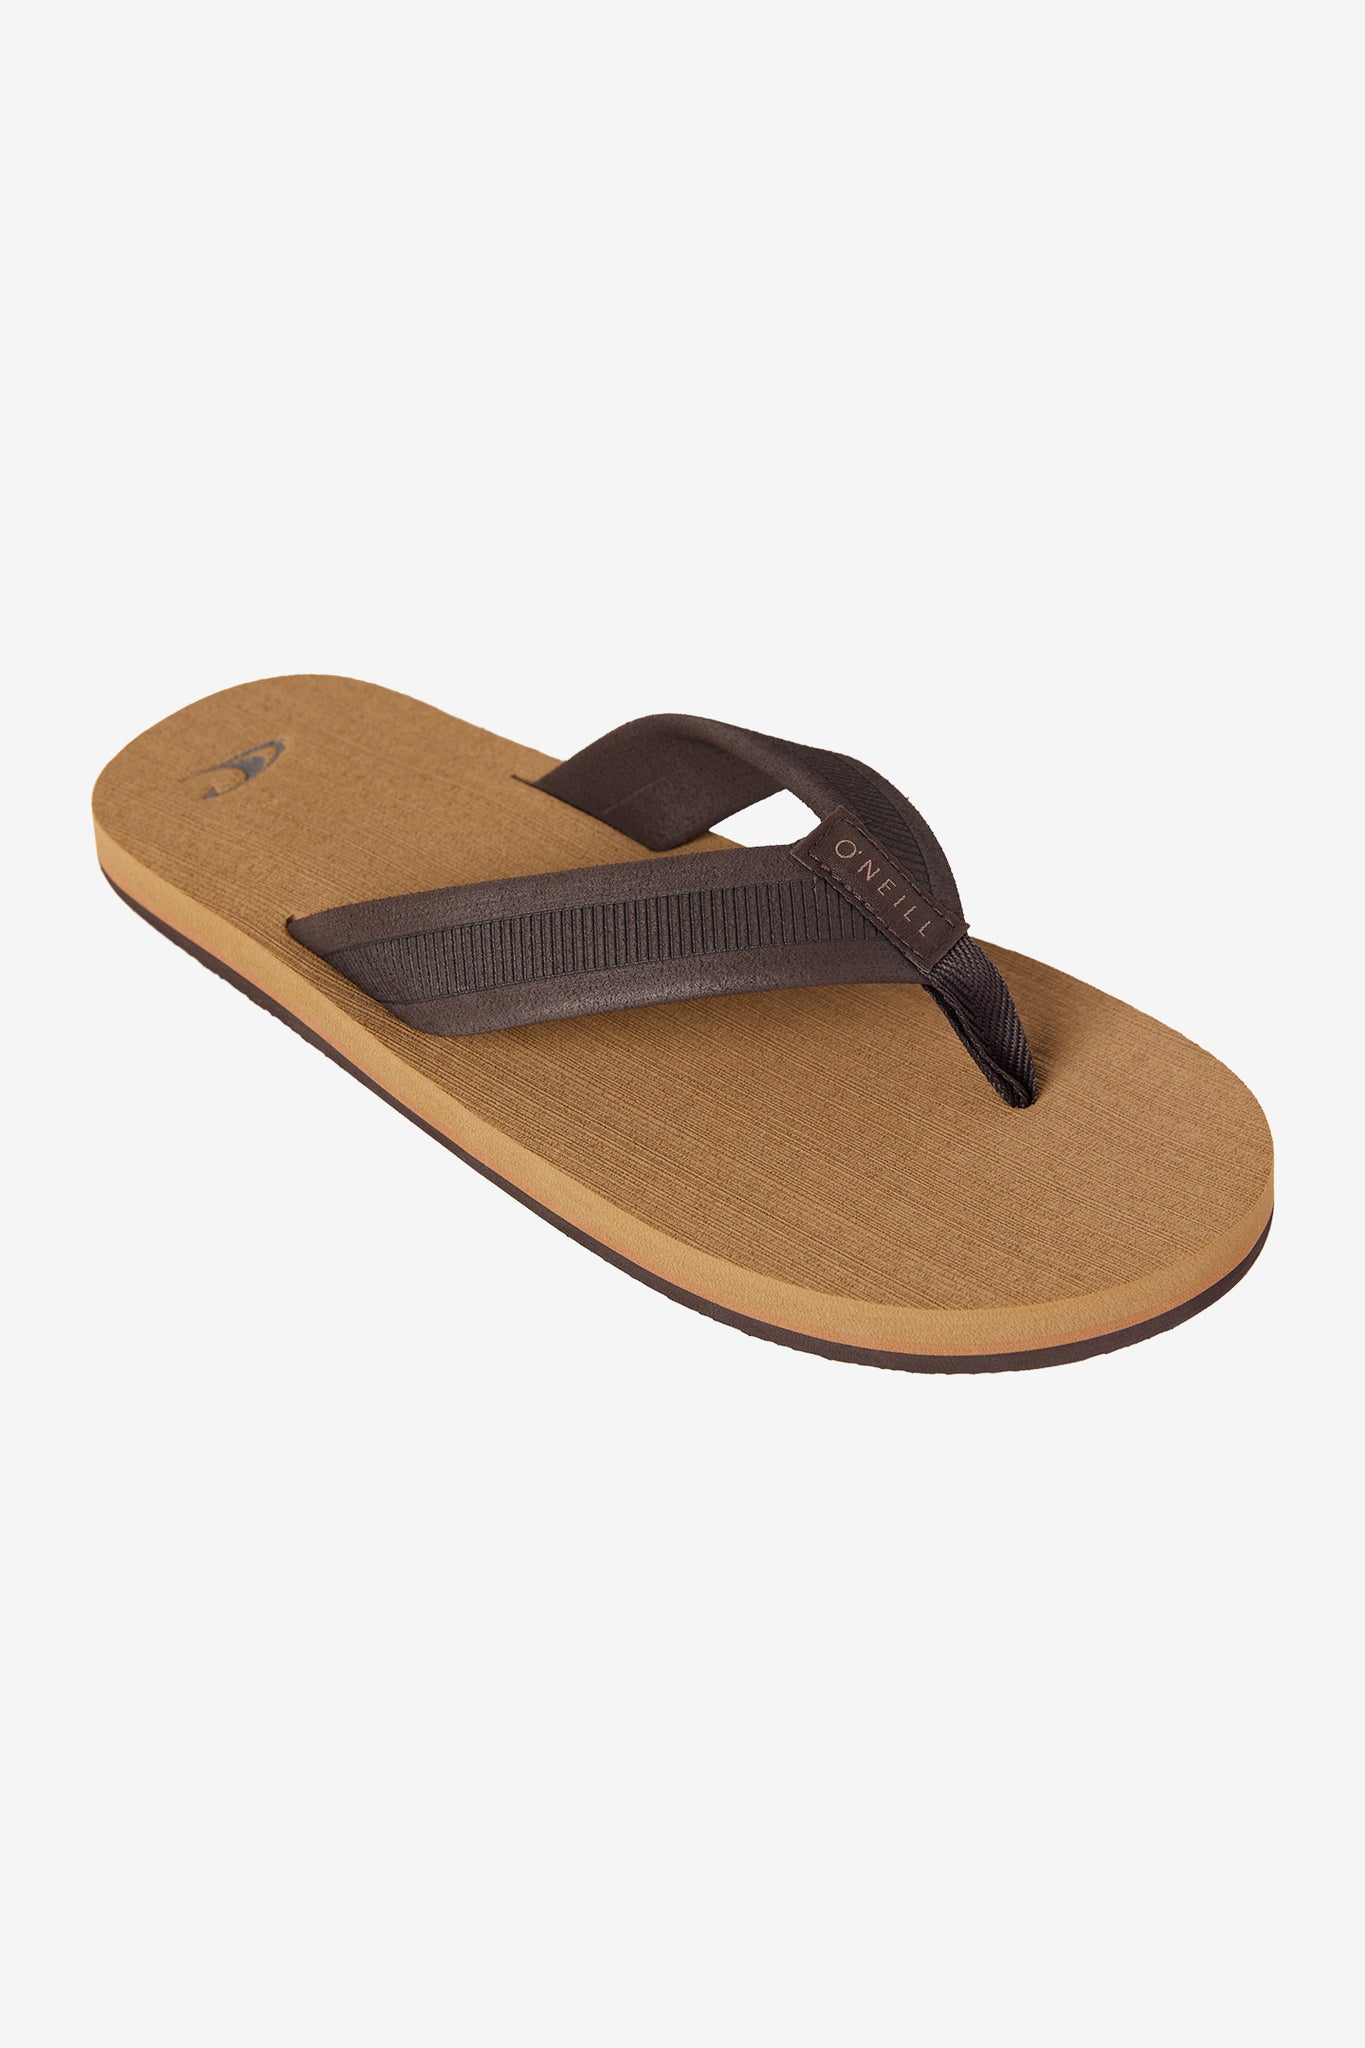 EXPEDITION SANDALS